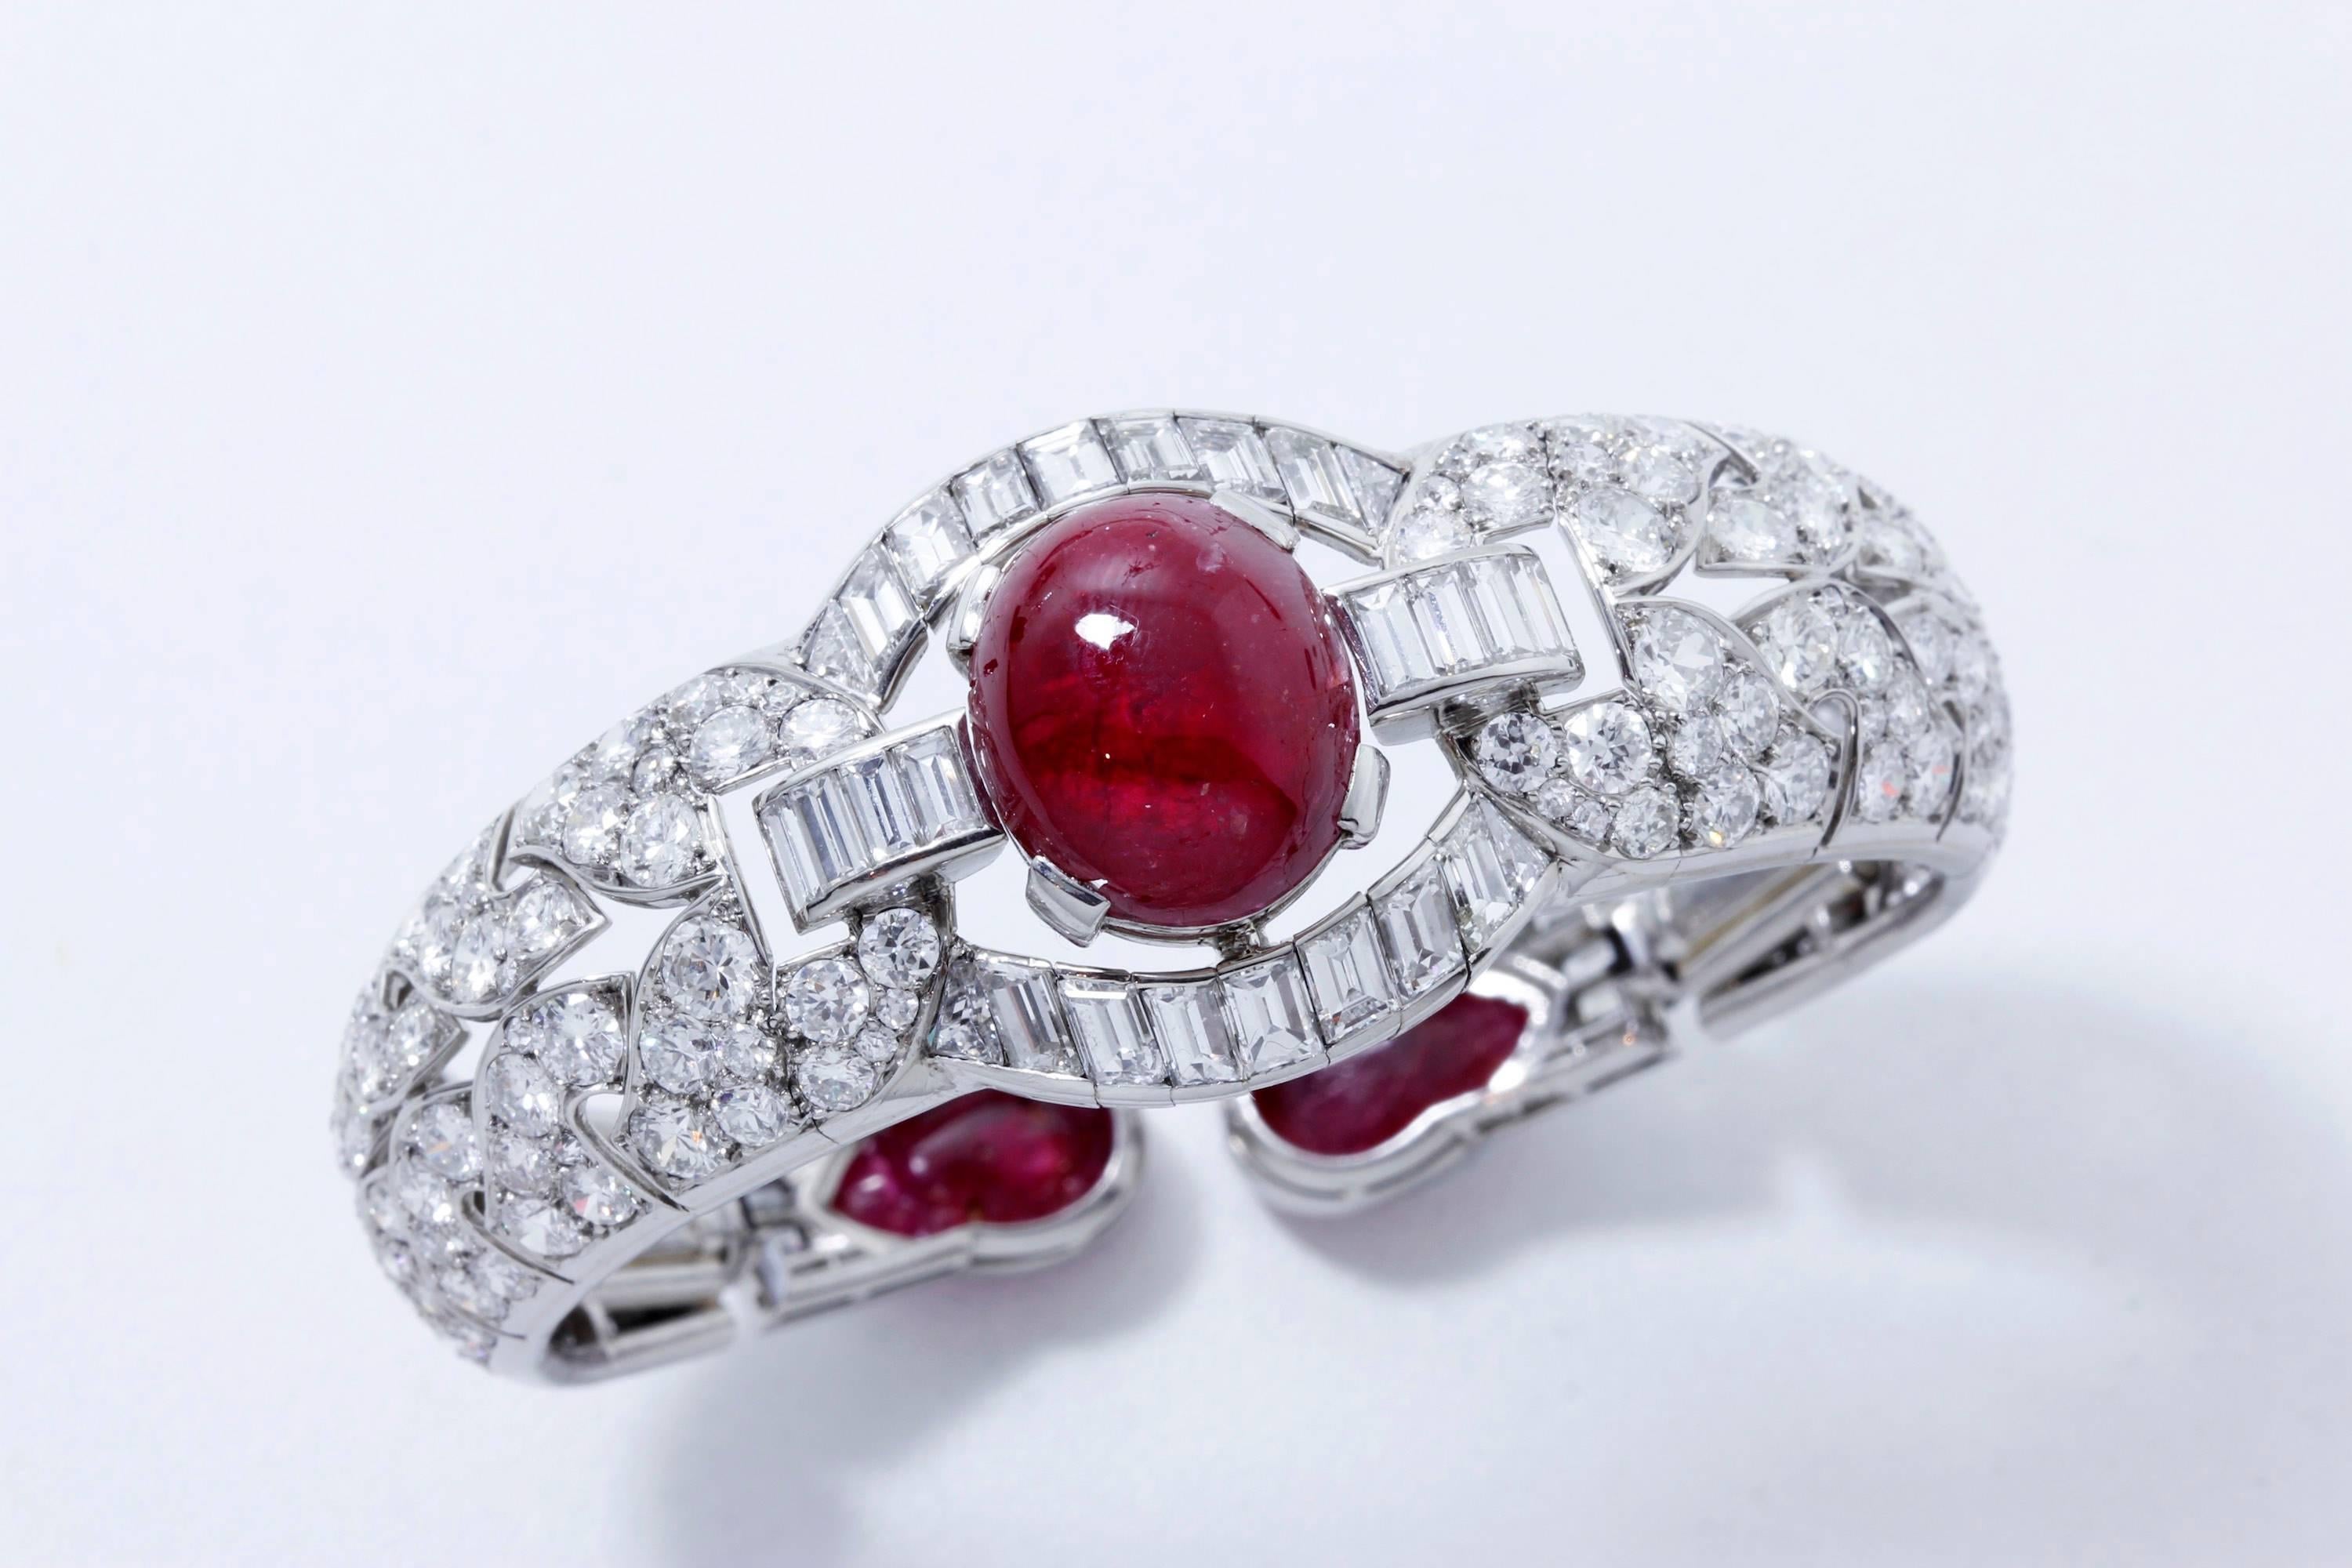 Elegant hinged bangle bracelet in platinum set with cabochon cut natural Burmese rubies , round brilliants and baguette cut diamonds.
Circa 1935
Measurements:
Diameter: 2.17 inches ( 55 mm )
Width at the most: 0.98 in ( 25mm )
Width at the least  :